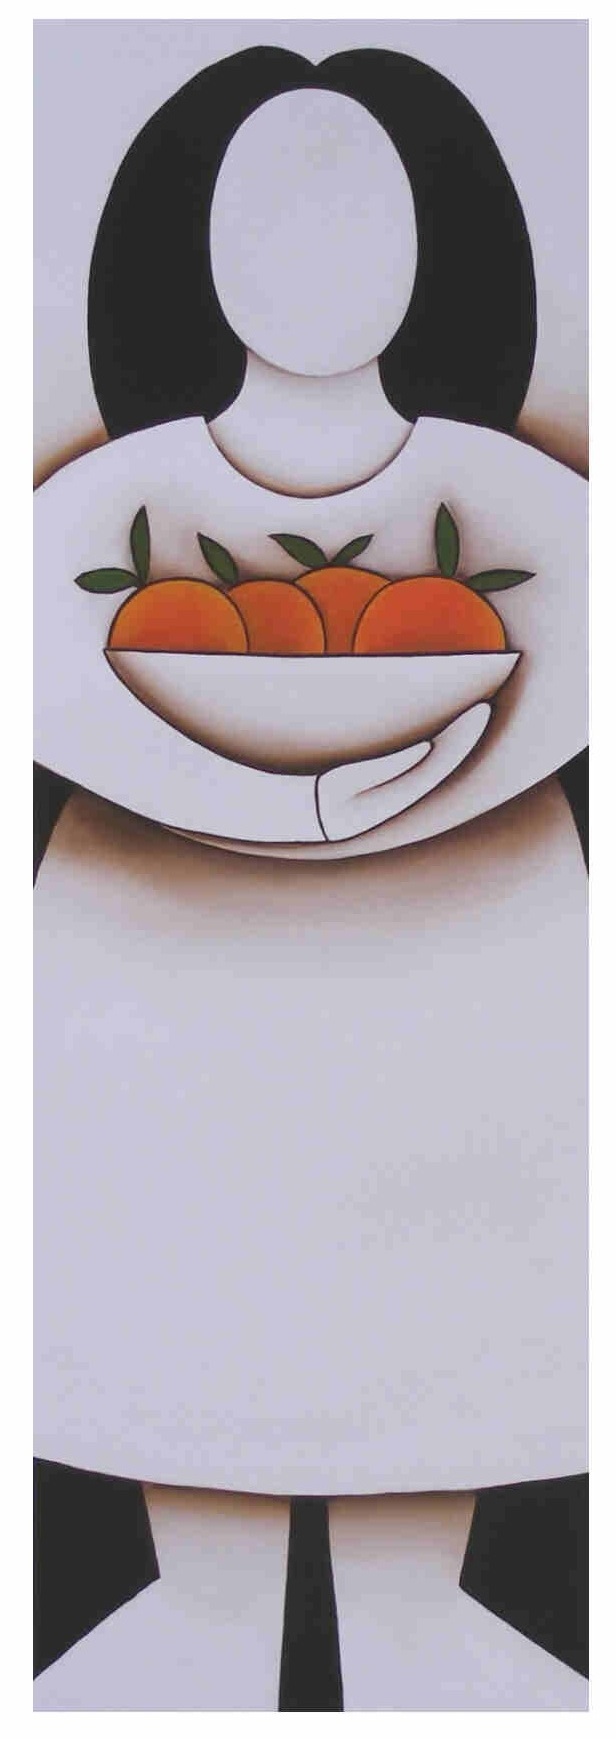 a limited edition poster of a simplified woman holding a bowl of oranges